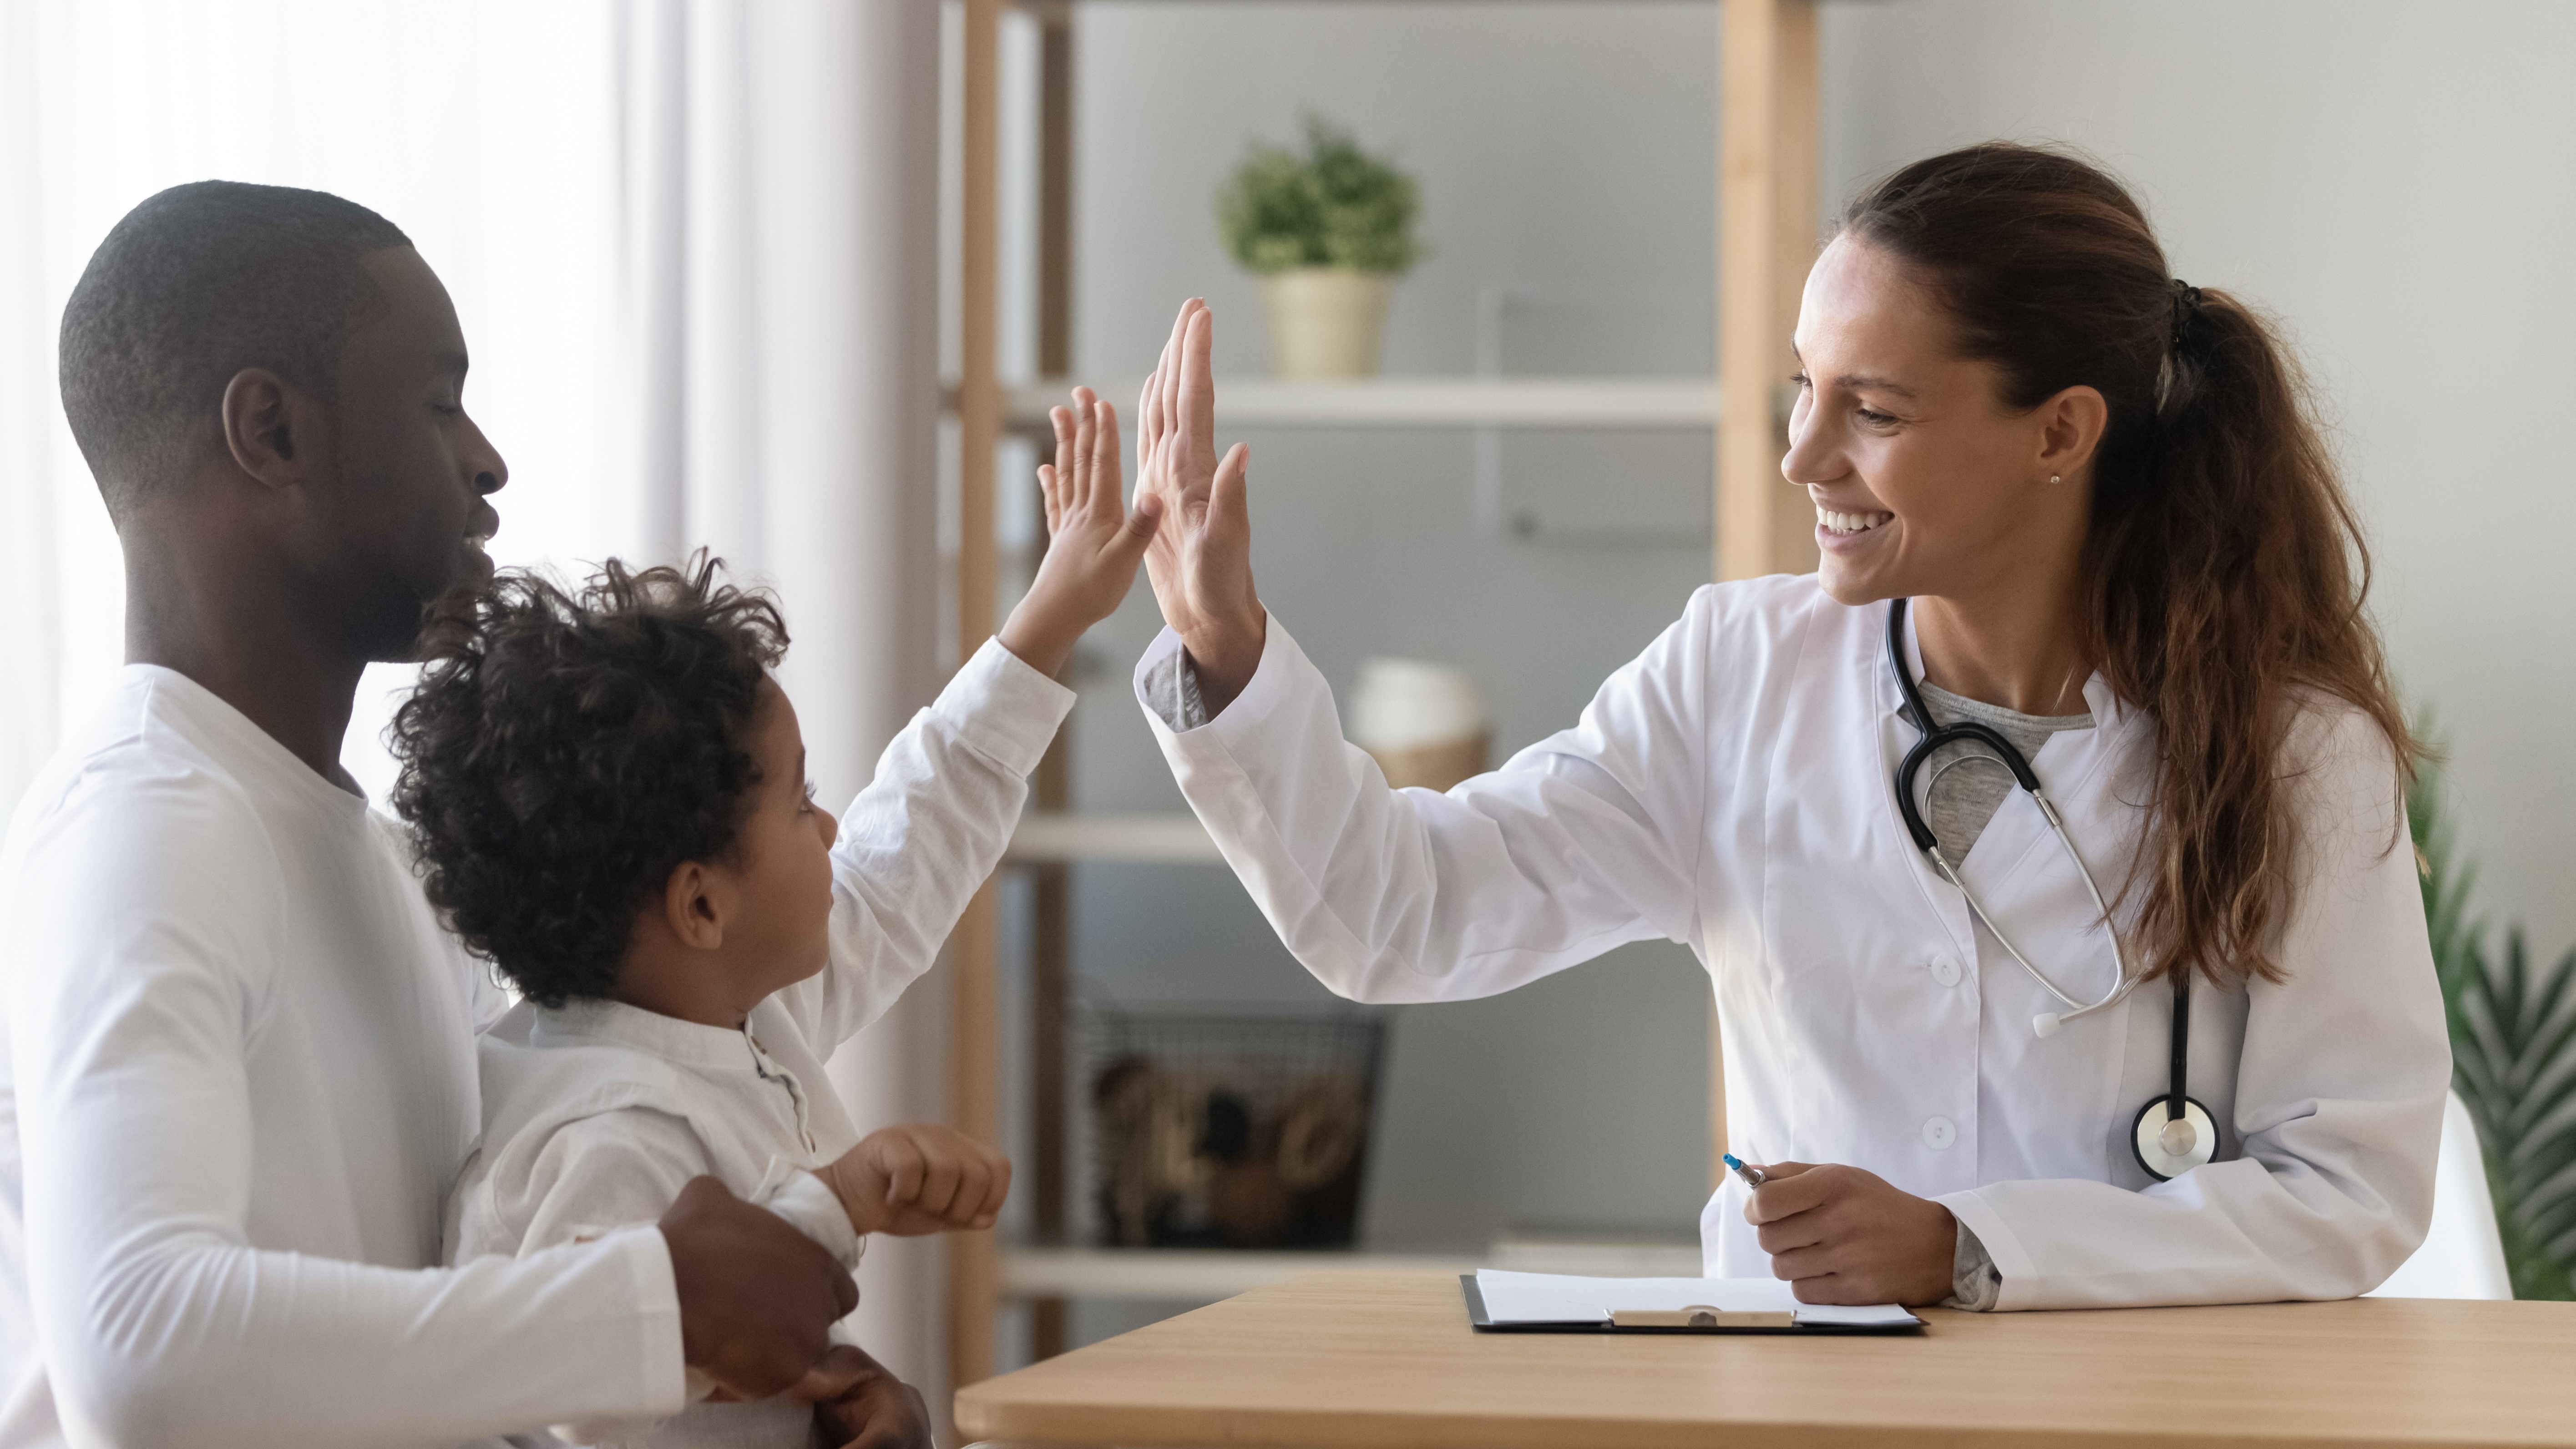 Banner image of healthcare provider giving high five to child patient